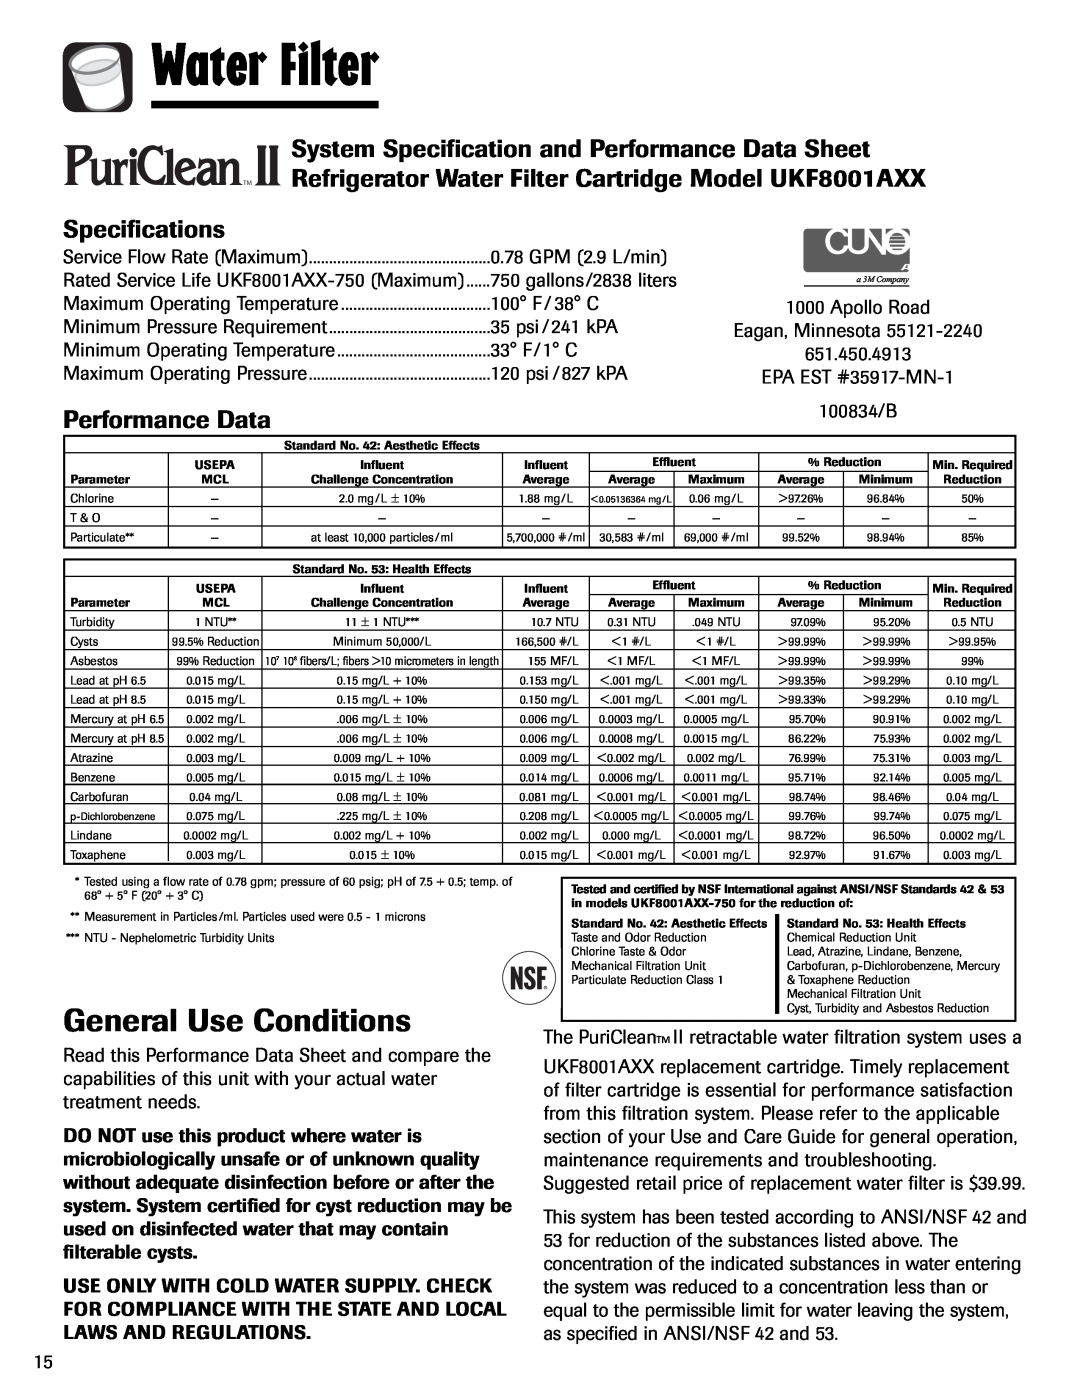 Maytag MFI2266AEW General Use Conditions, System Specification and Performance Data Sheet, Specifications, Water Filter 